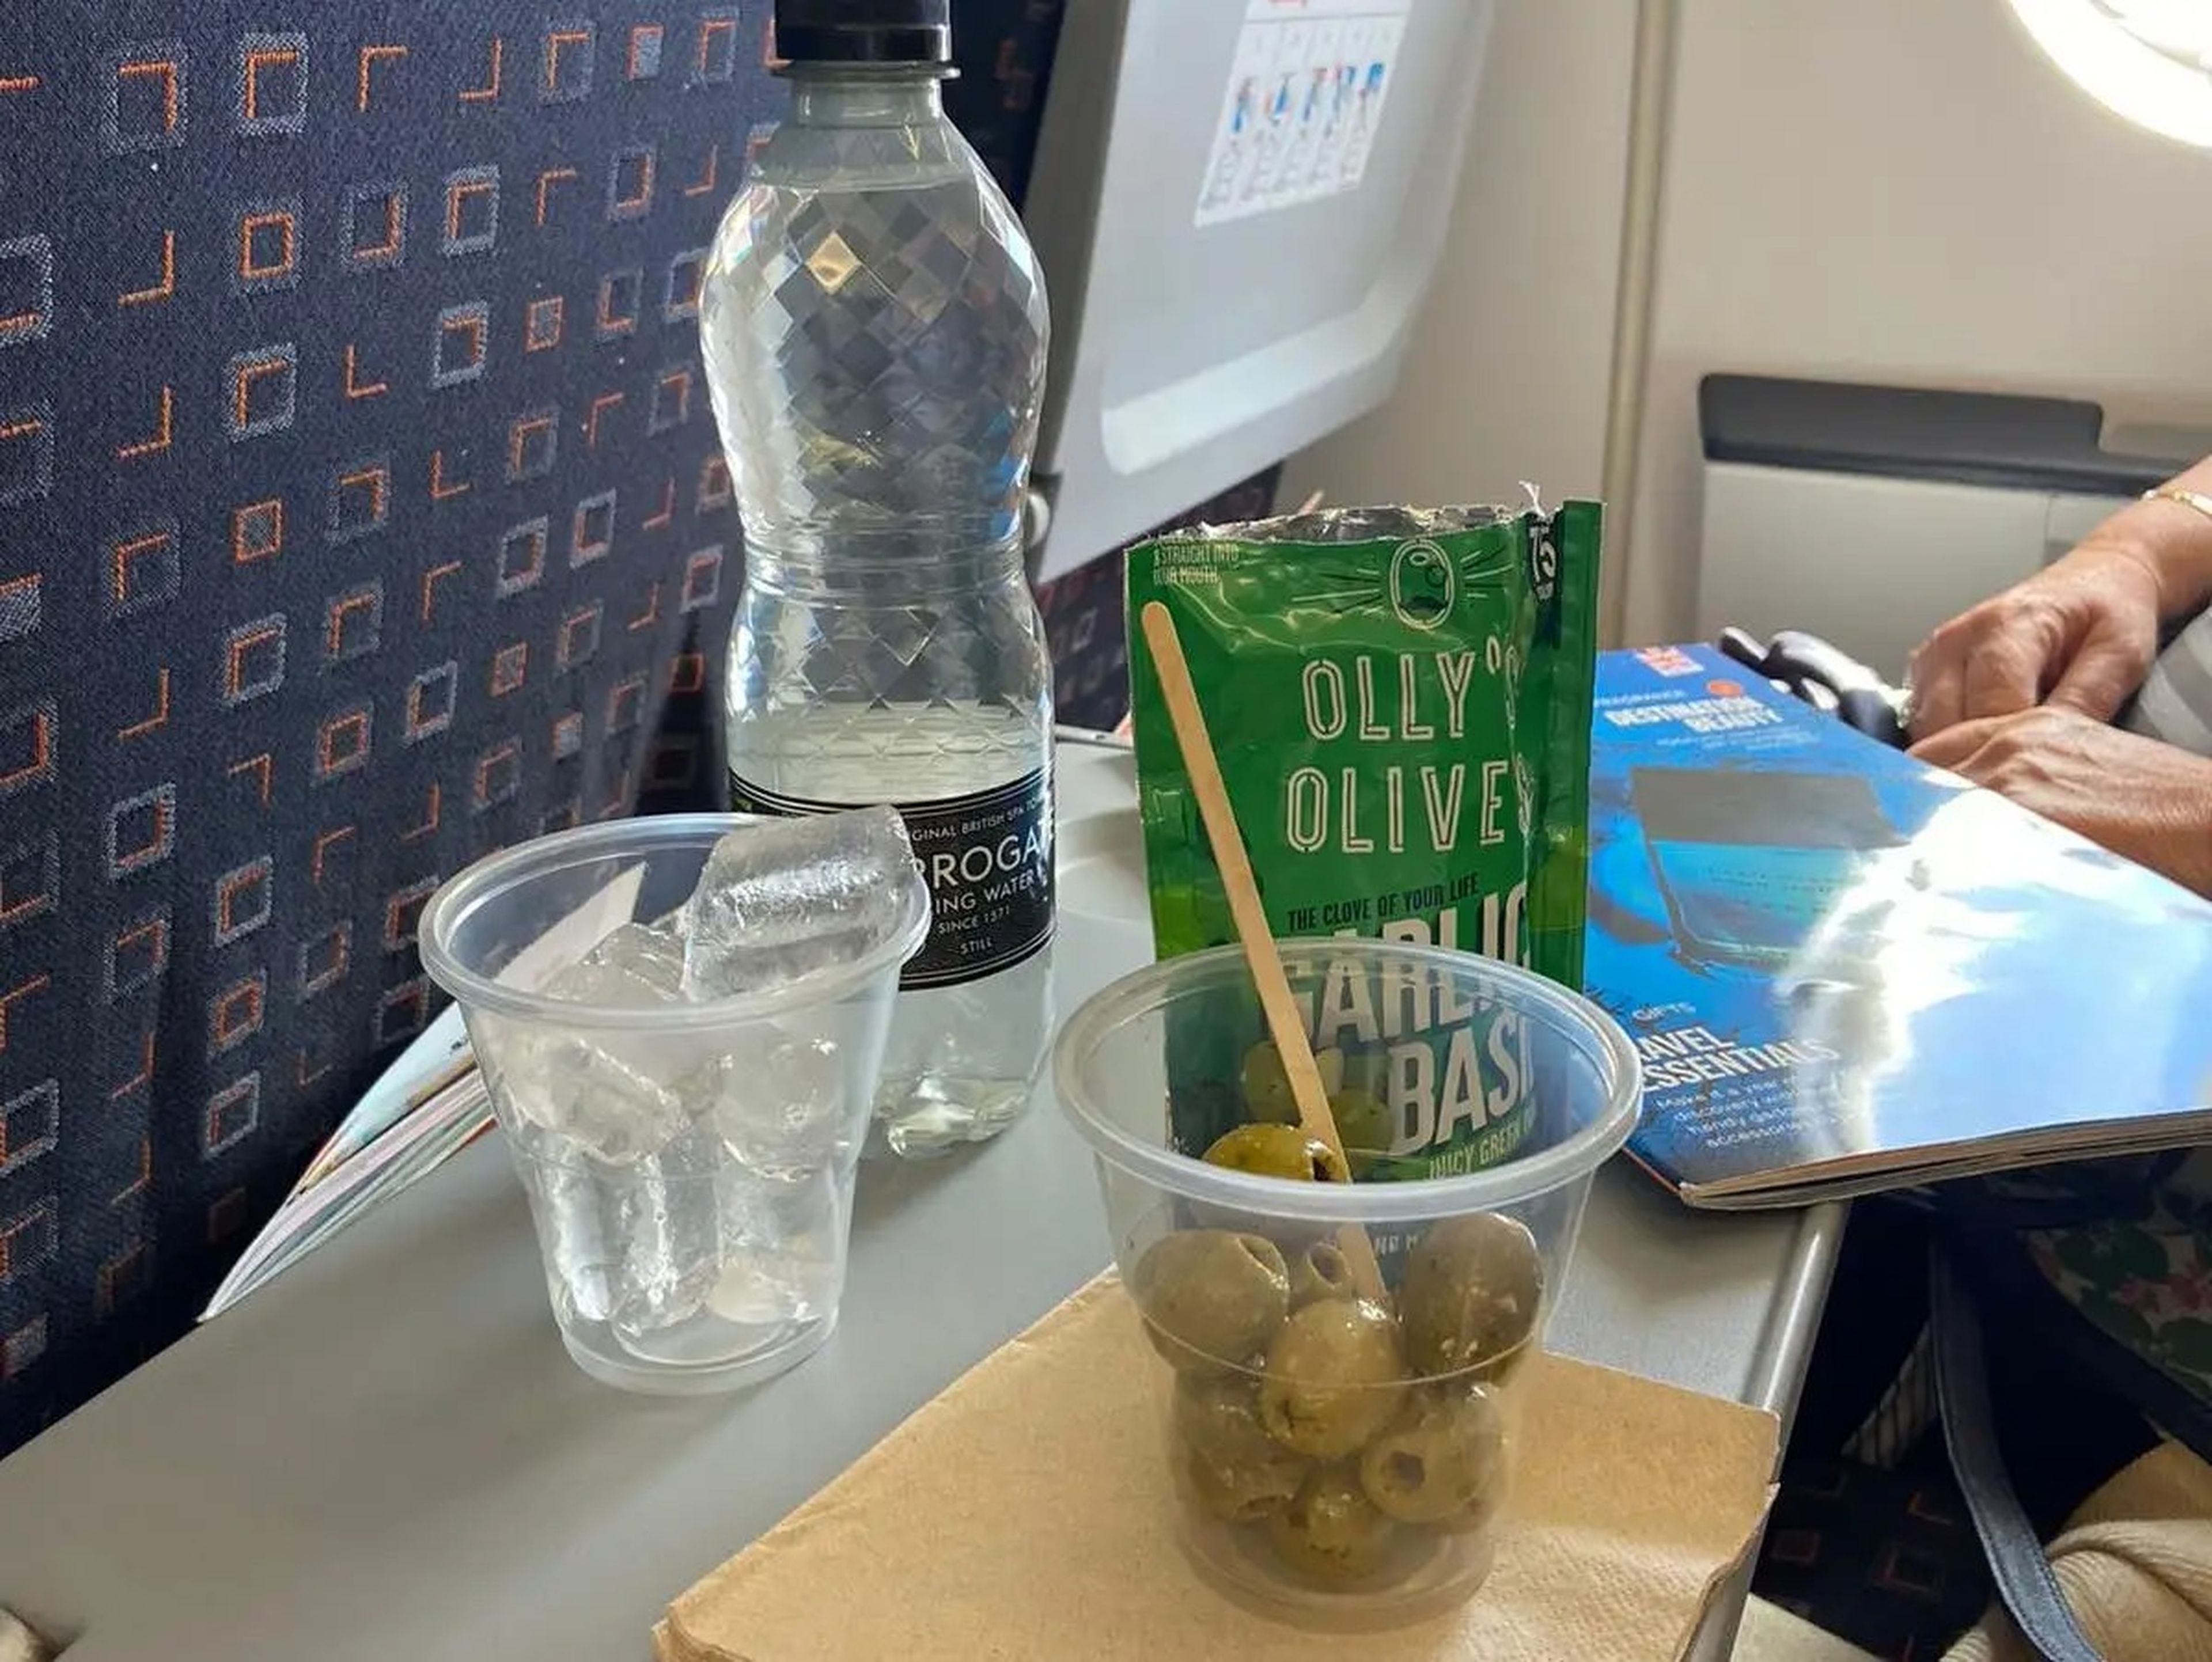 Cup of olives next to empty package of olives and a plastic bottle of beverage on a plane tray